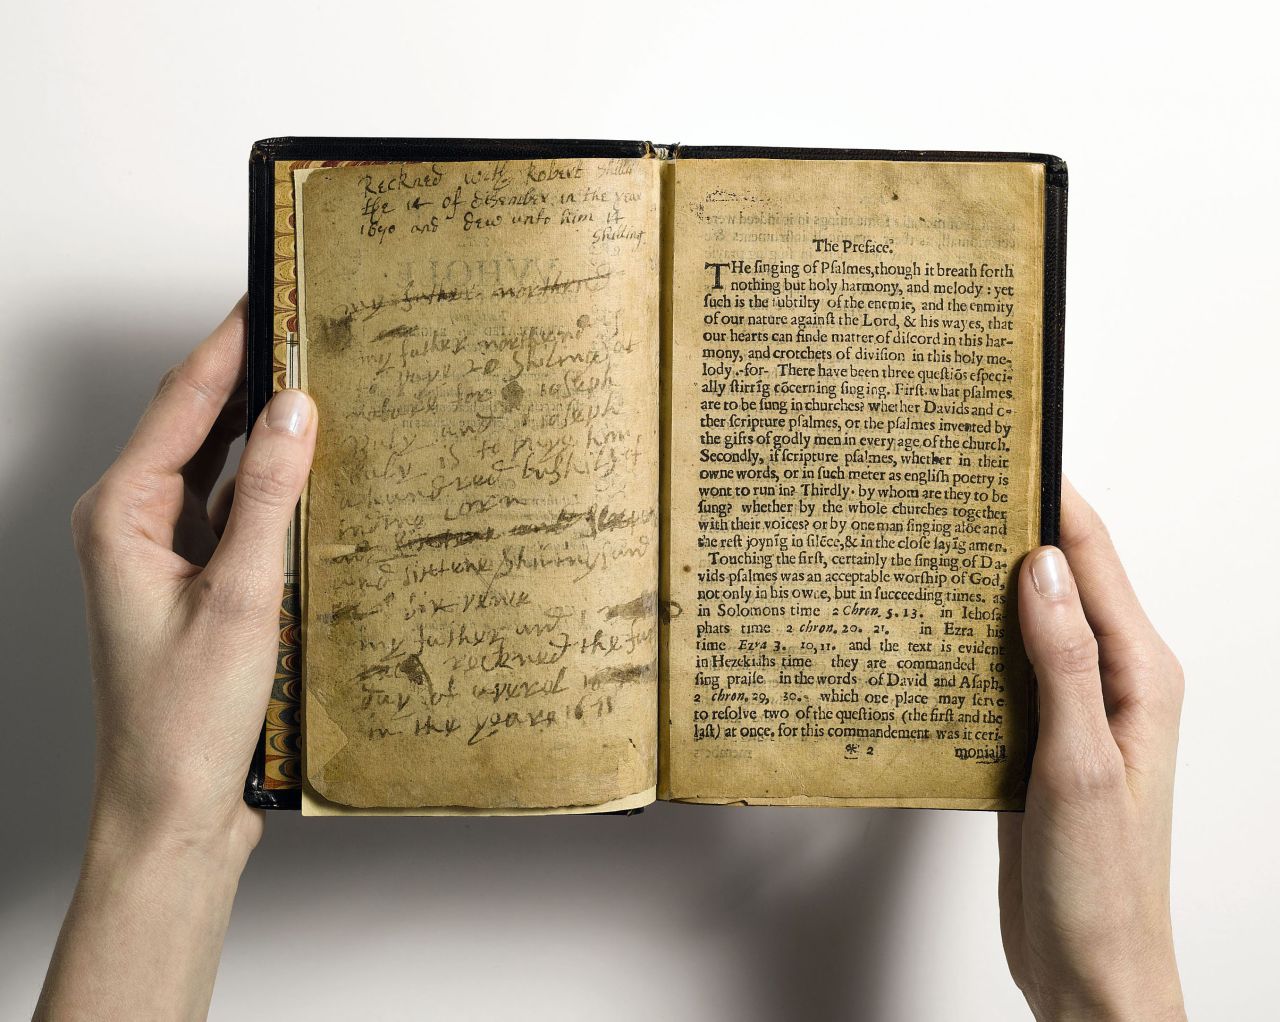 "The Whole Booke of Psalmes" -- universally known as "The Bay Psalm Book" -- was produced in the virtual wilderness of Massachusetts Bay Colony by the Congregationalist Puritans. When it sold for $14,165,000, it set a world auction record for any printed book.